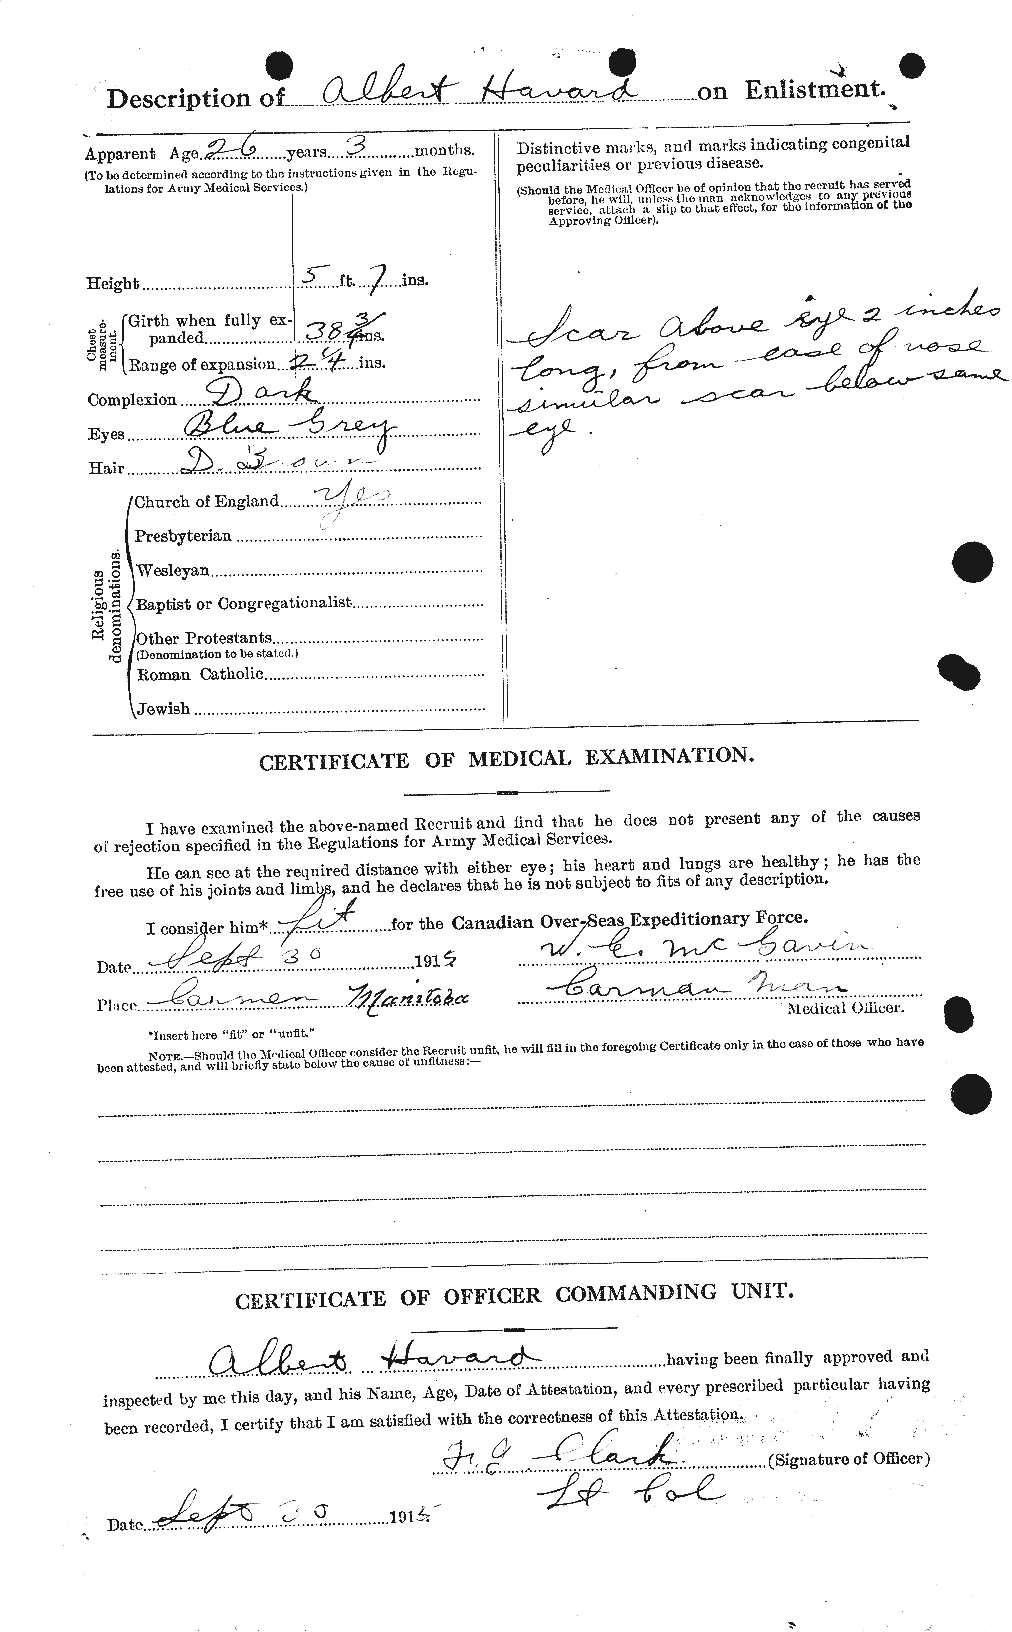 Personnel Records of the First World War - CEF 383240b